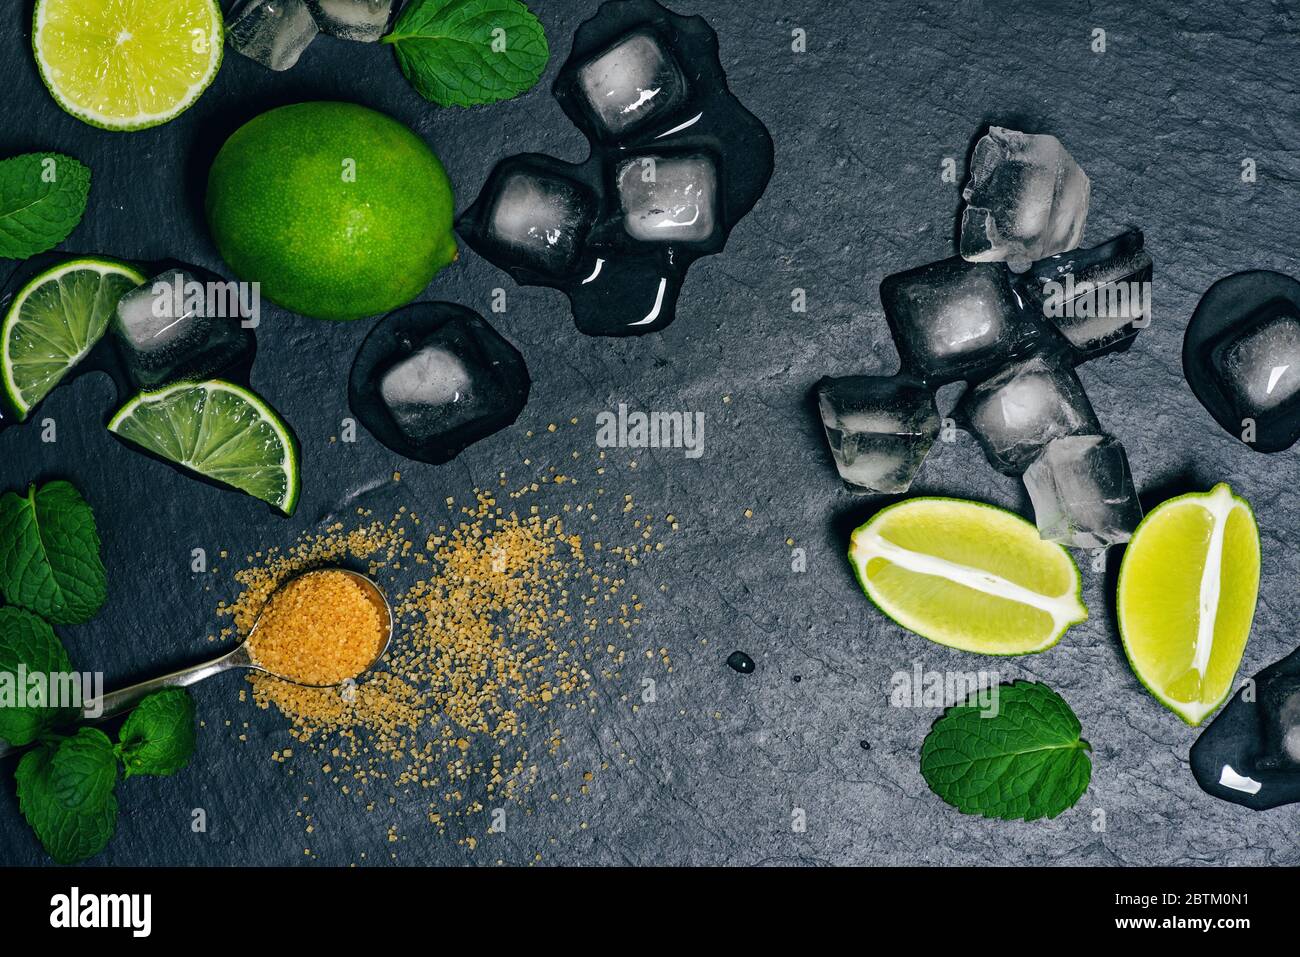 Top view of fresh mint, limes, ice, sugar on black background Ingredients for mojito. Stock Photo